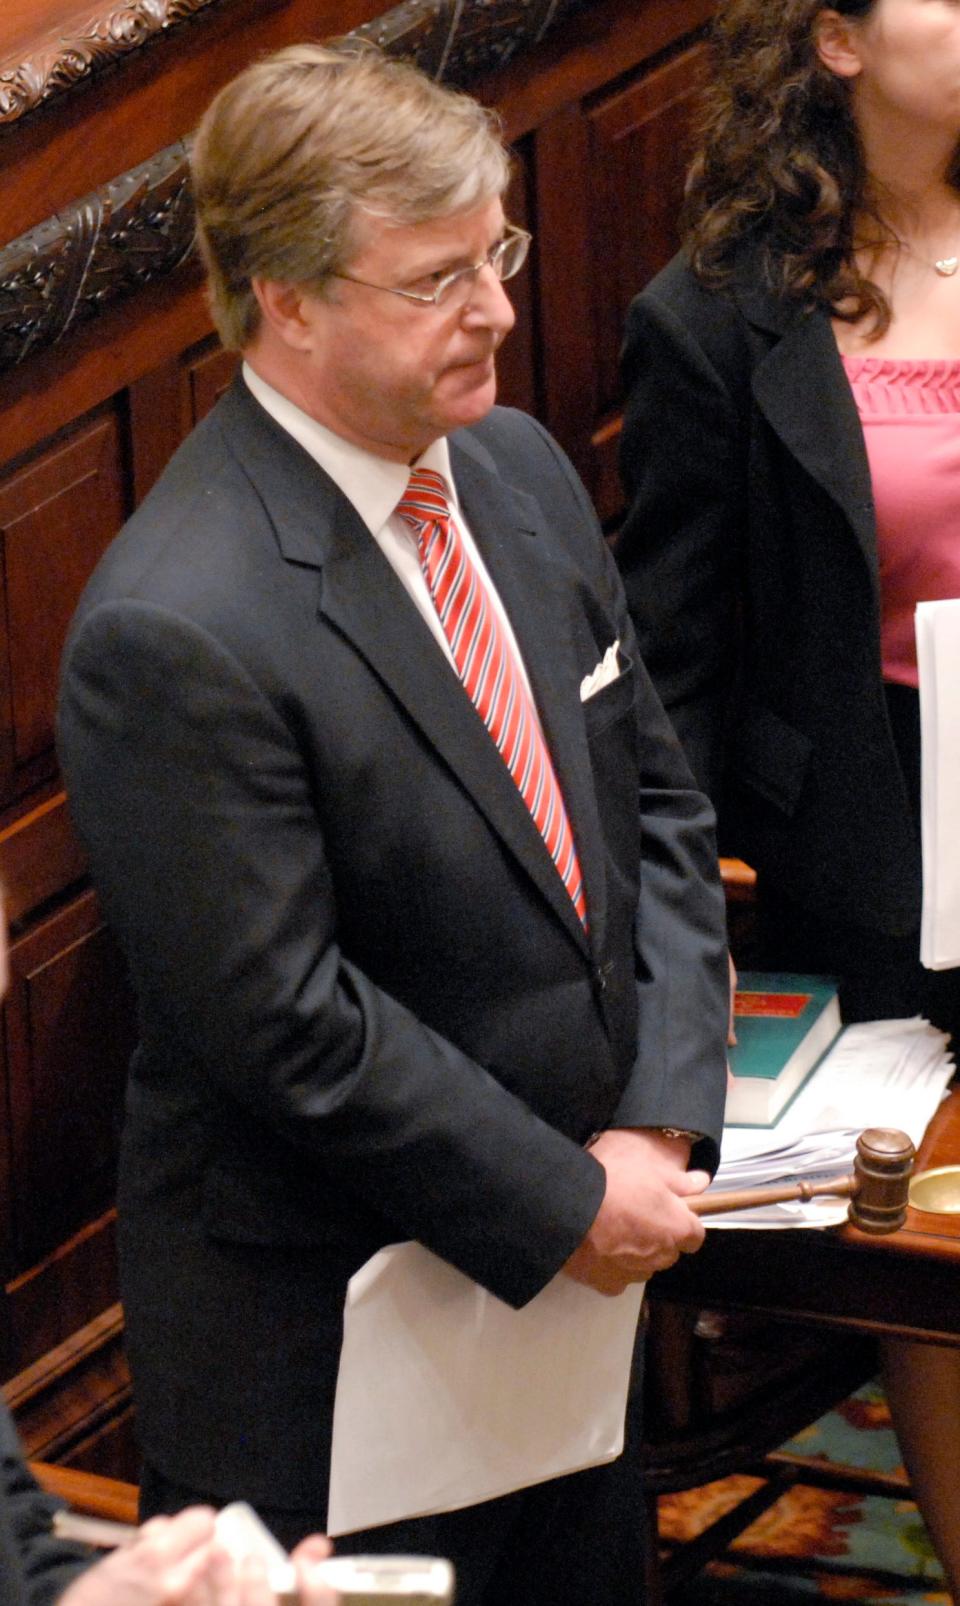 Sen. George Winner, R-Elmira, holds a gavel during a New York Senate session at the Capitol in Albany, N.Y. on Tuesday, June 23, 2009.  Winner was denied access to the podium at the start of the session, so he presided over the passage of bills from the floor. 